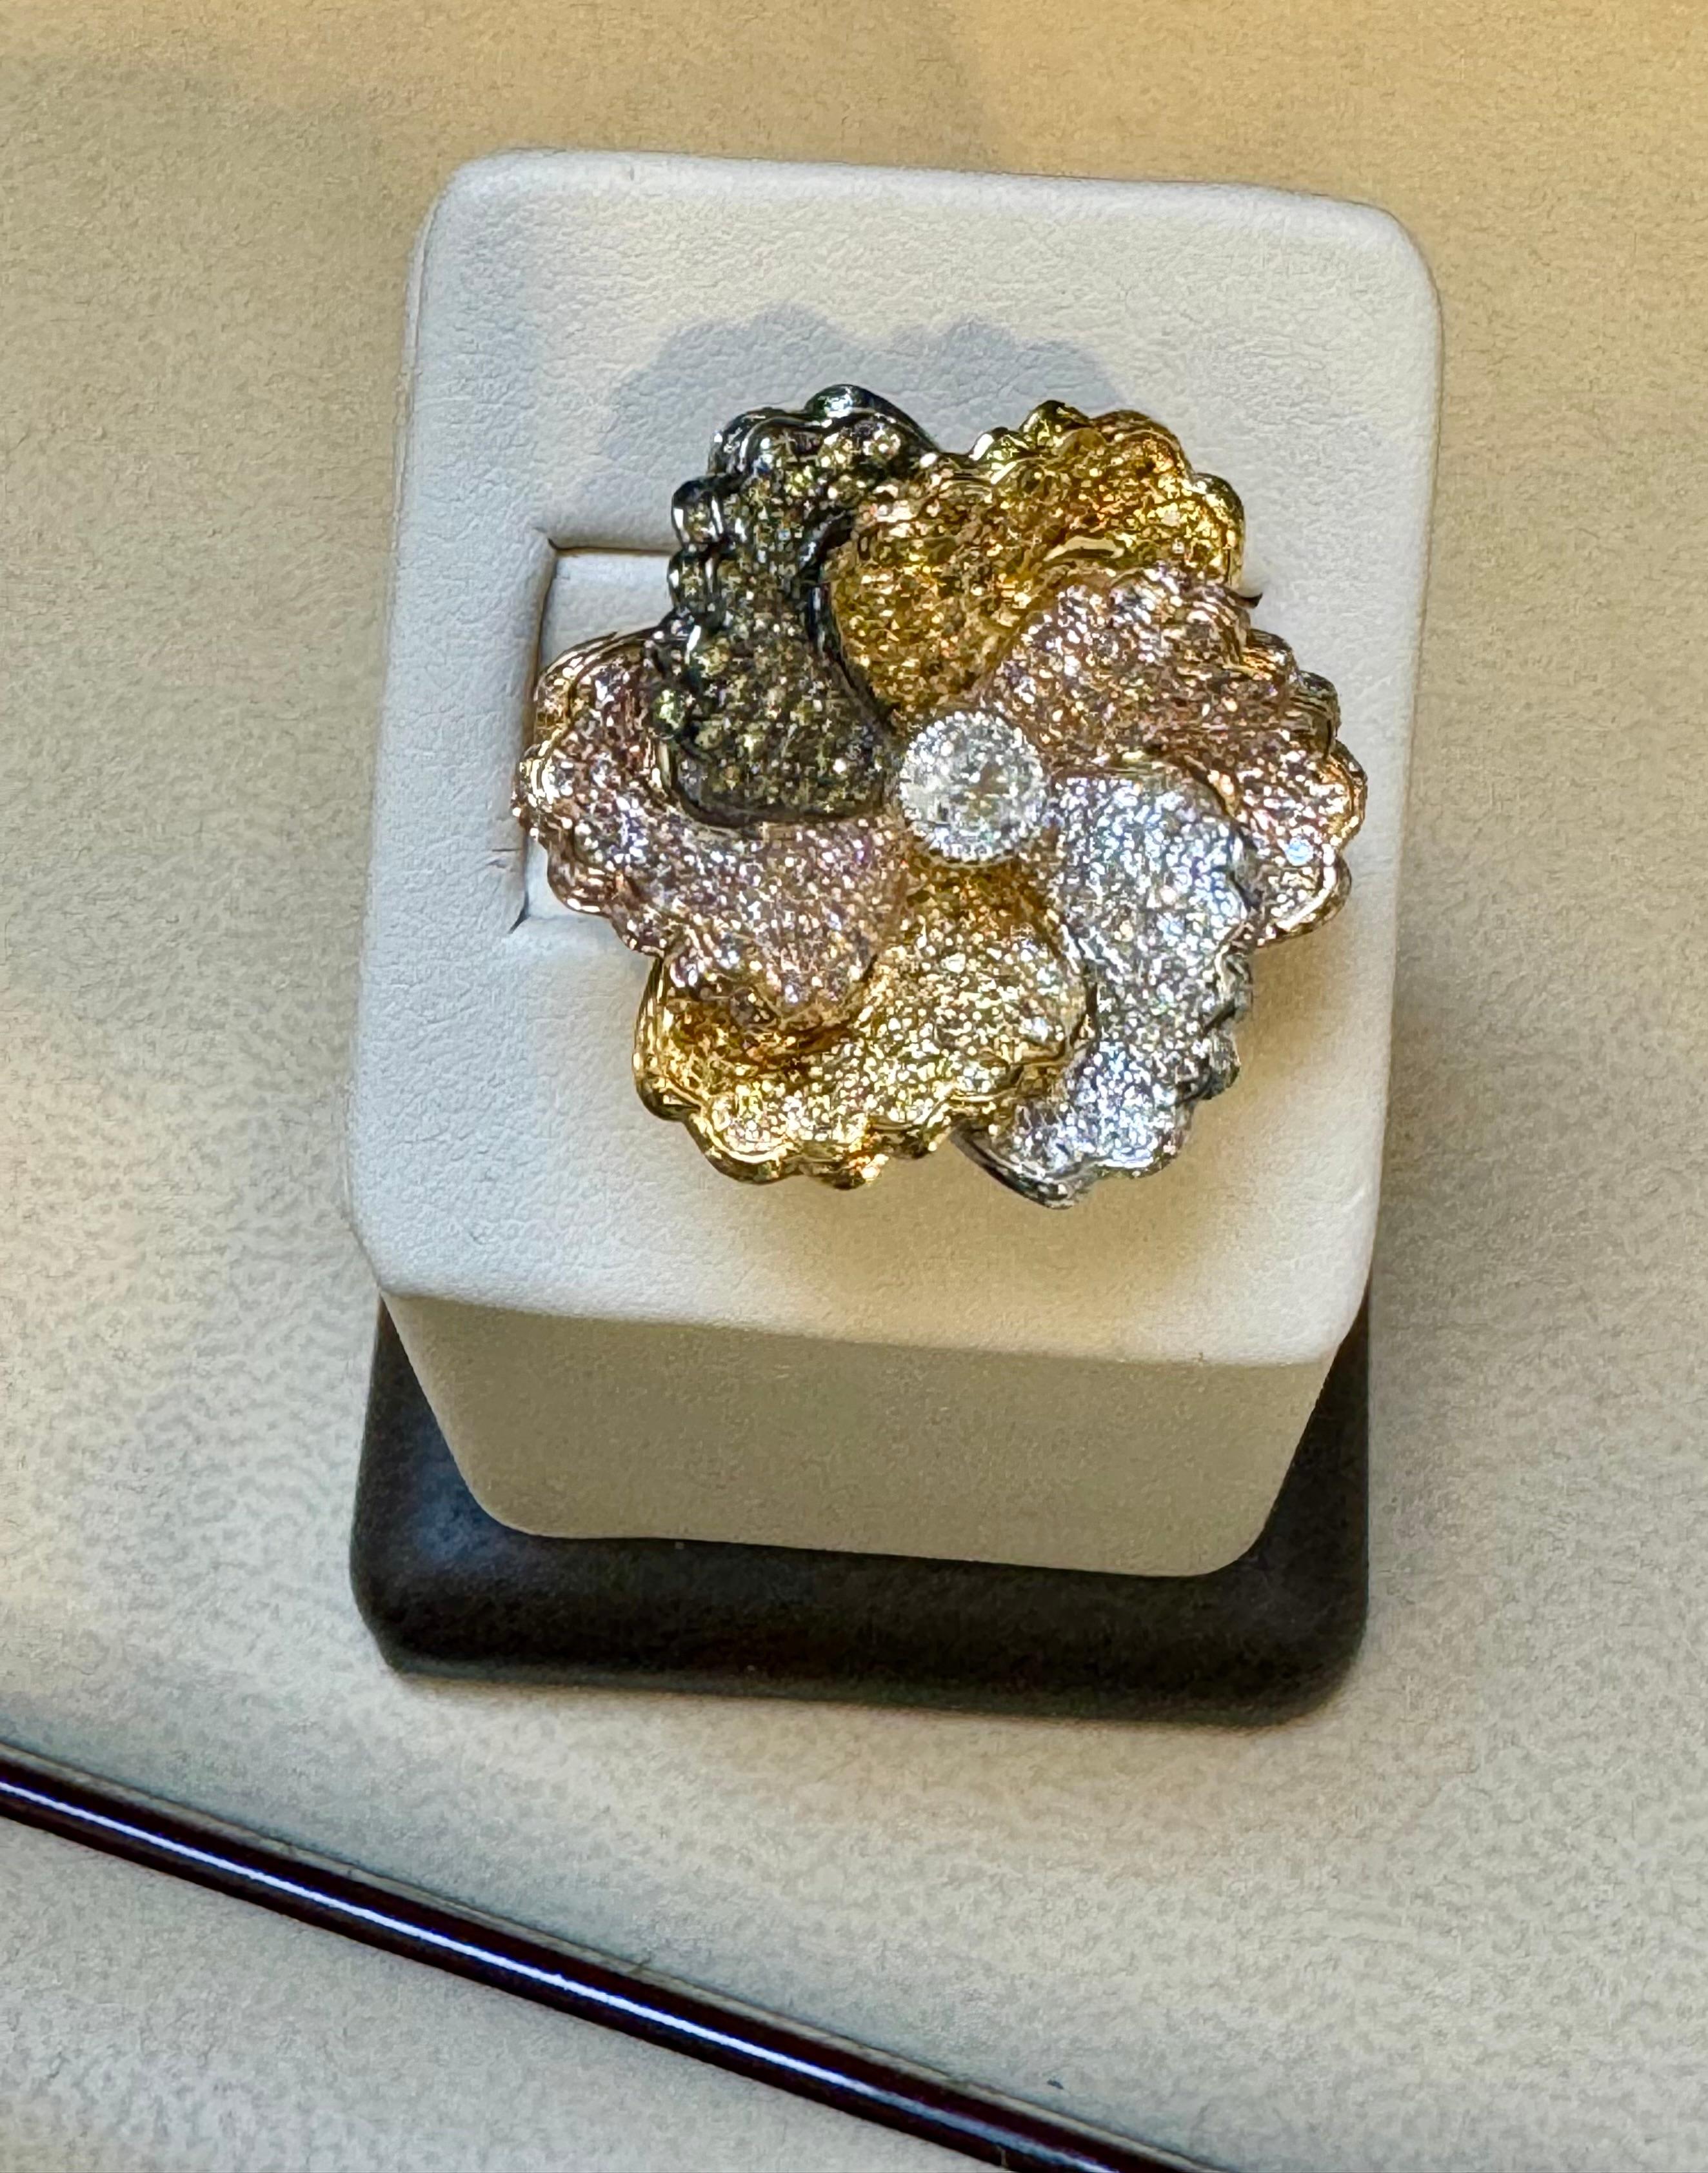 Round Cut 3 Ct Natural Fancy Color Diamond Flower Ring in 18 Karat Multi Color Gold Size 6 For Sale